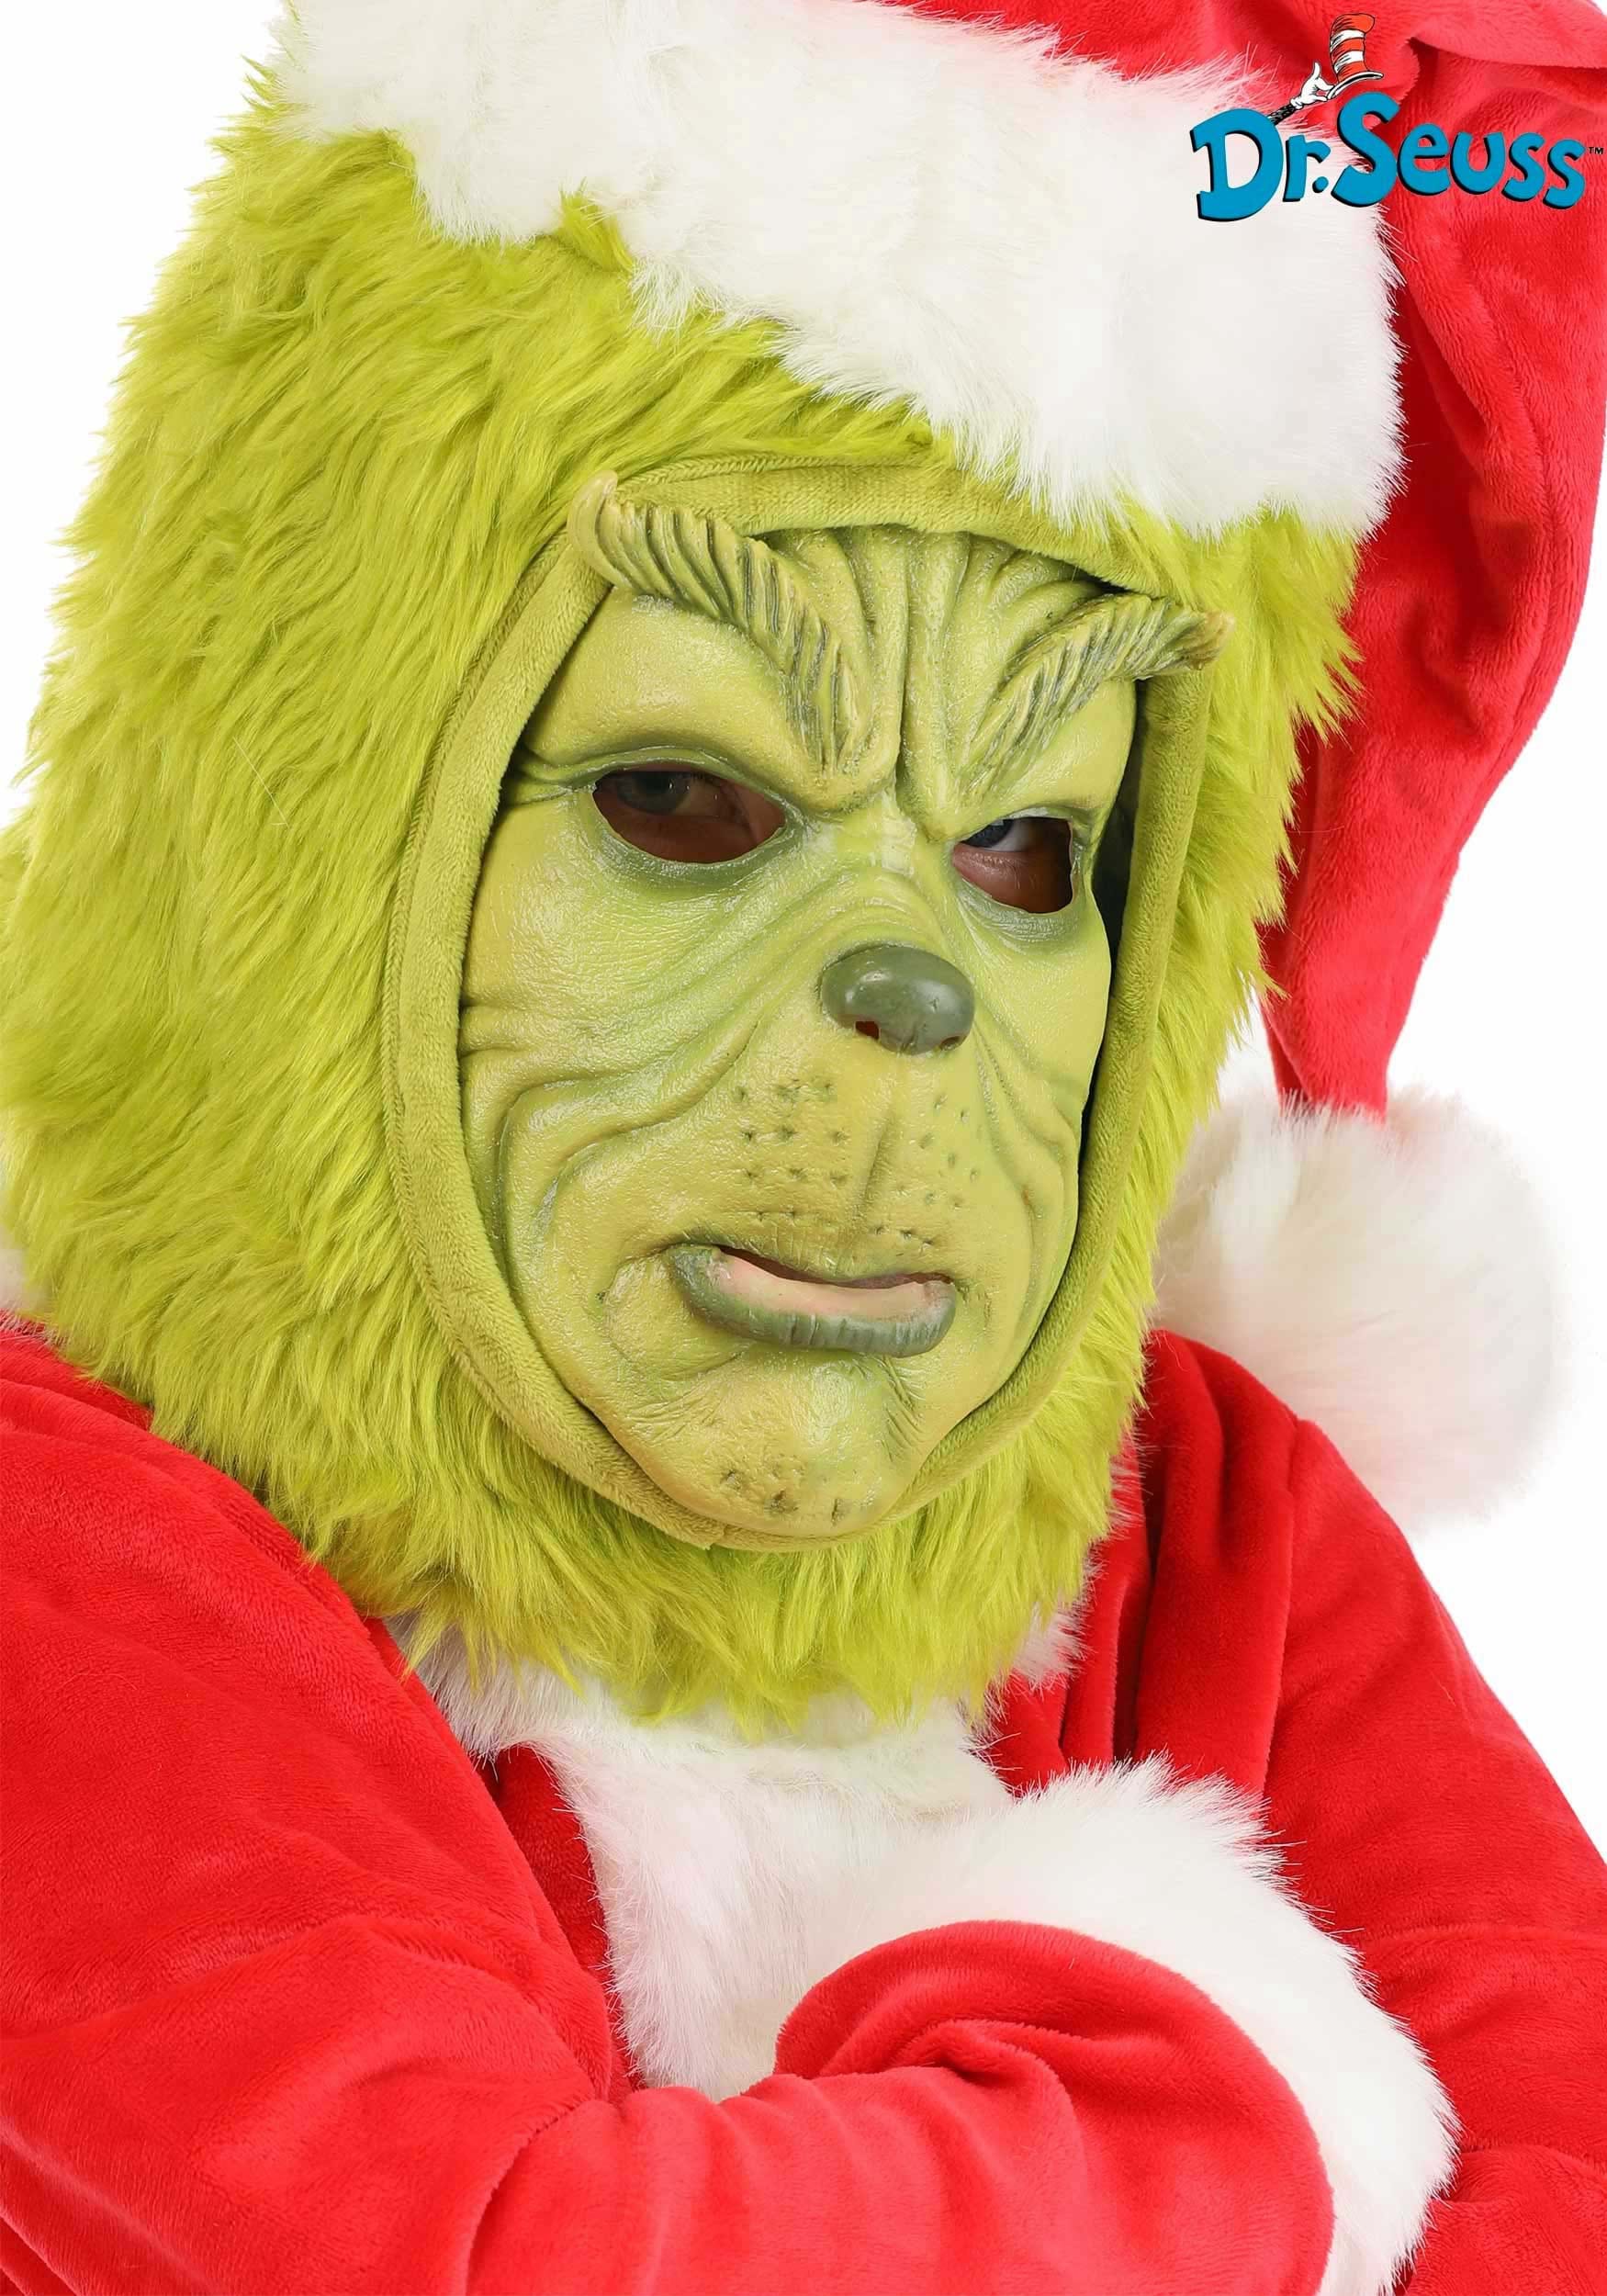 Dr. Seuss The Grinch Kid's Costume Mask